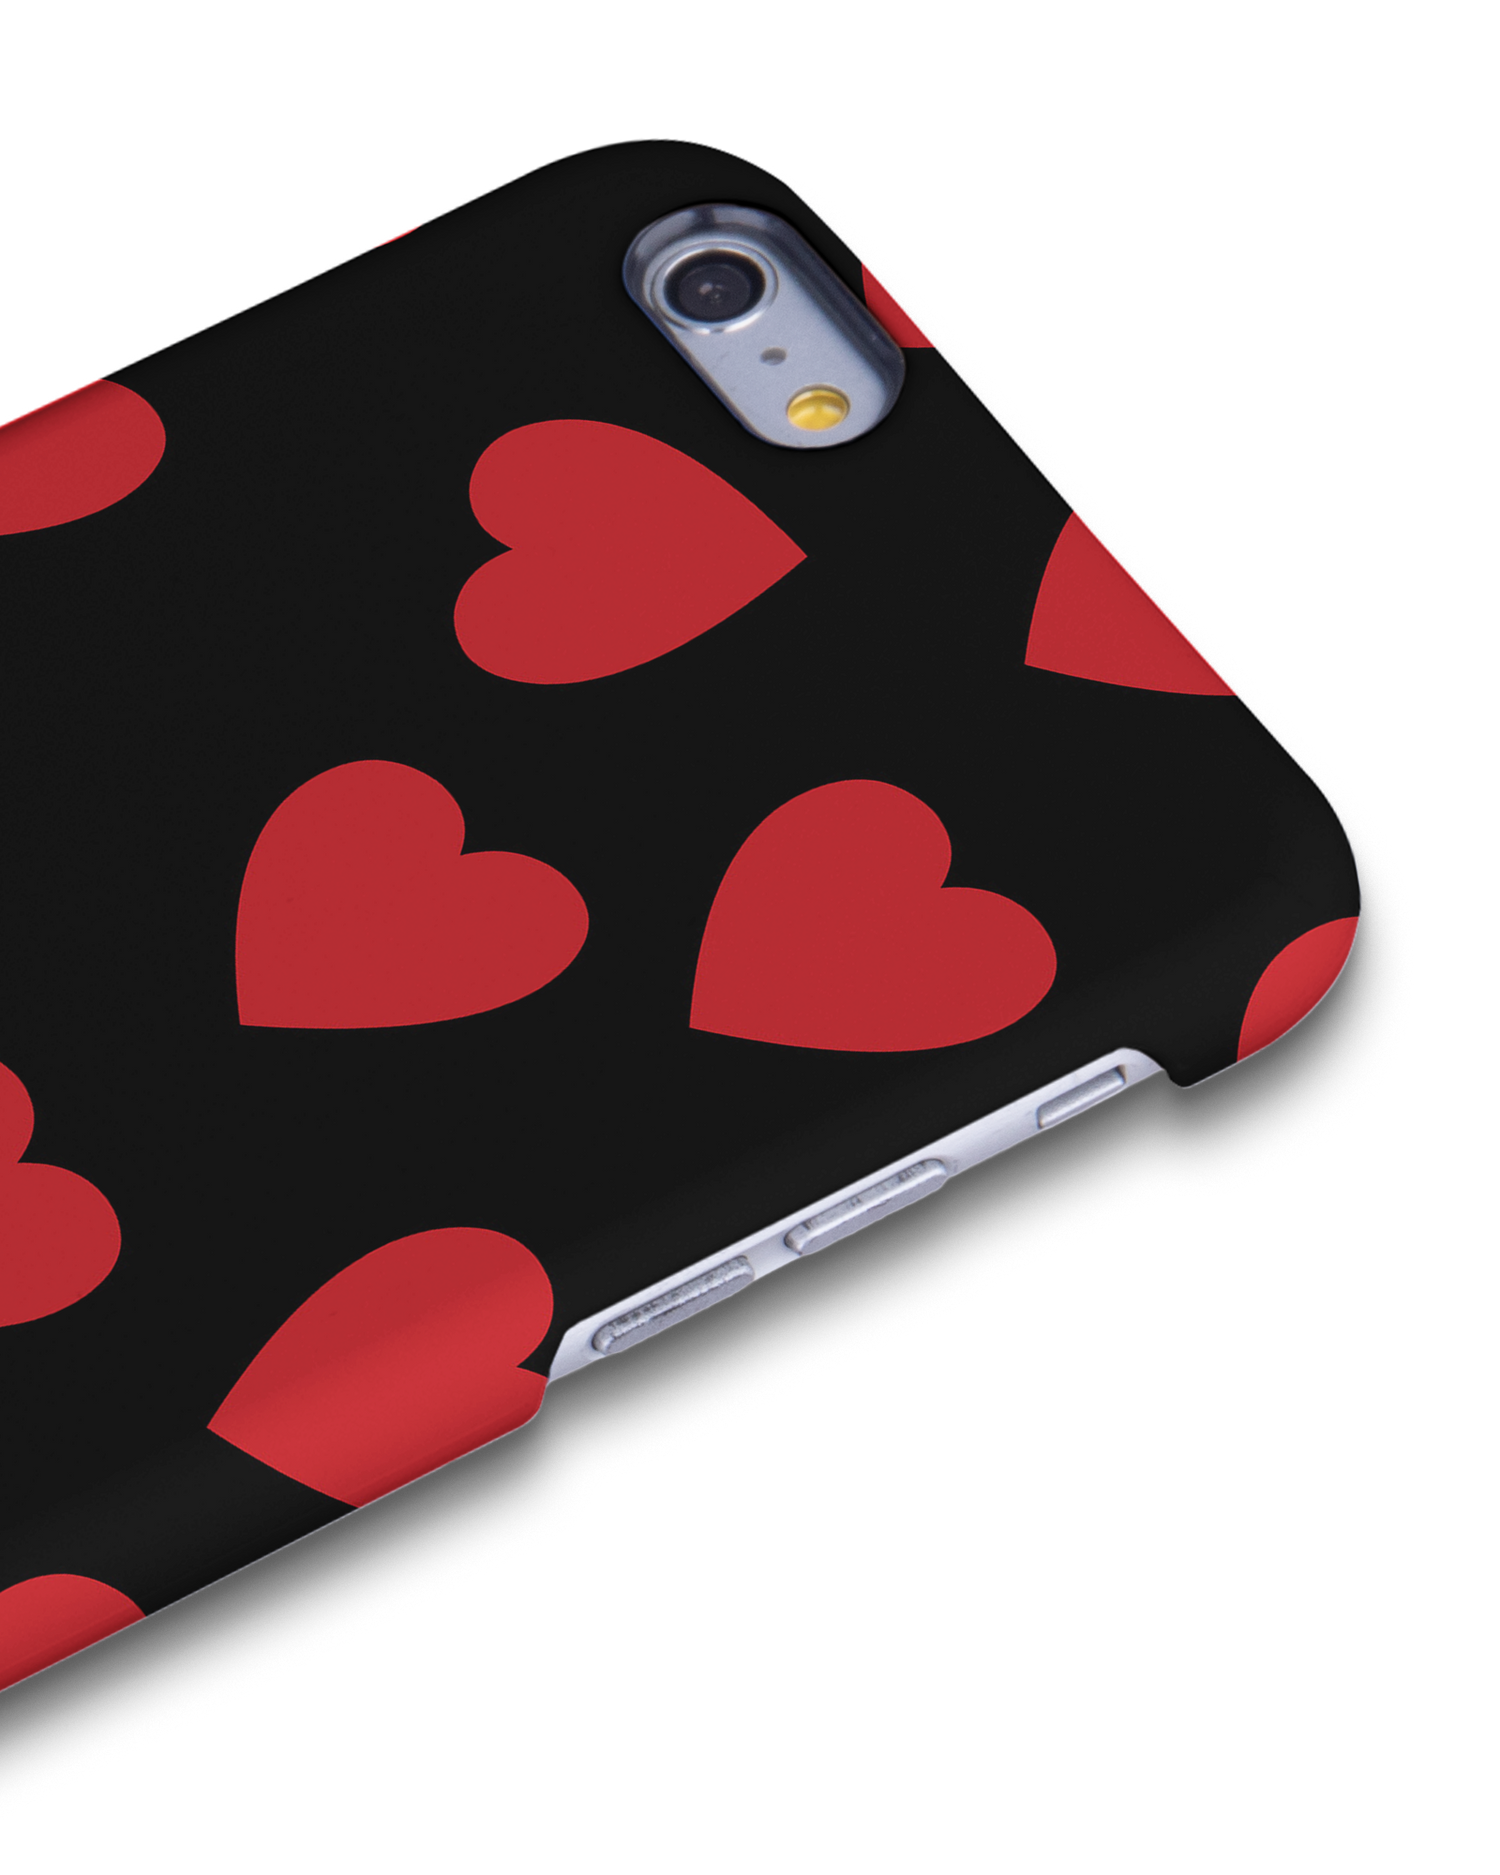 Repeating Hearts Hard Shell Phone Case Apple iPhone 6 Plus, Apple iPhone 6s Plus: Detail Shot